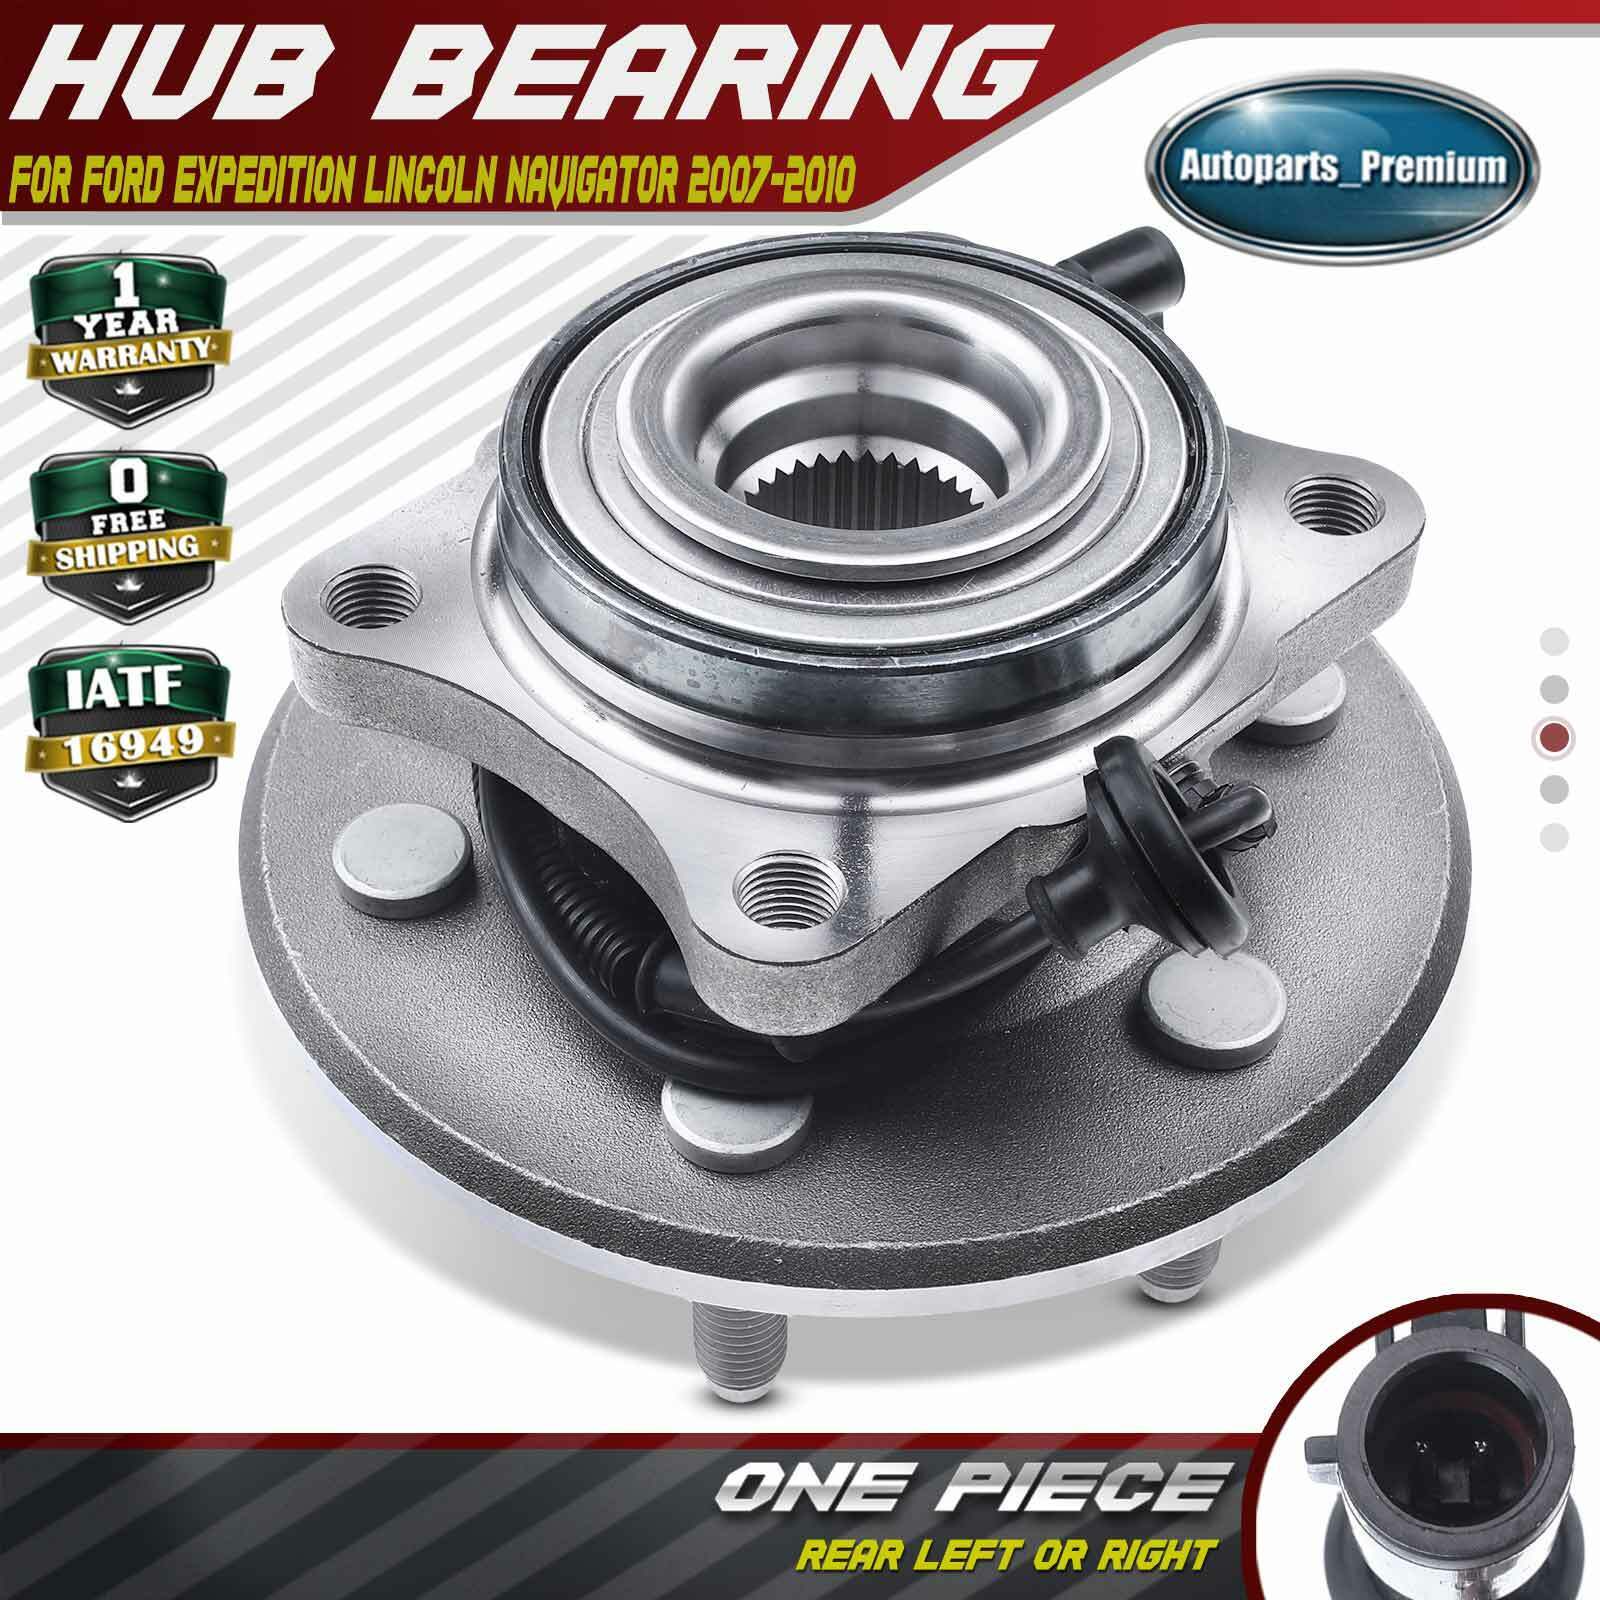 Rear L/ R Wheel Hub Bearing Assembly for Ford Expedition Lincoln Navigator 07-10